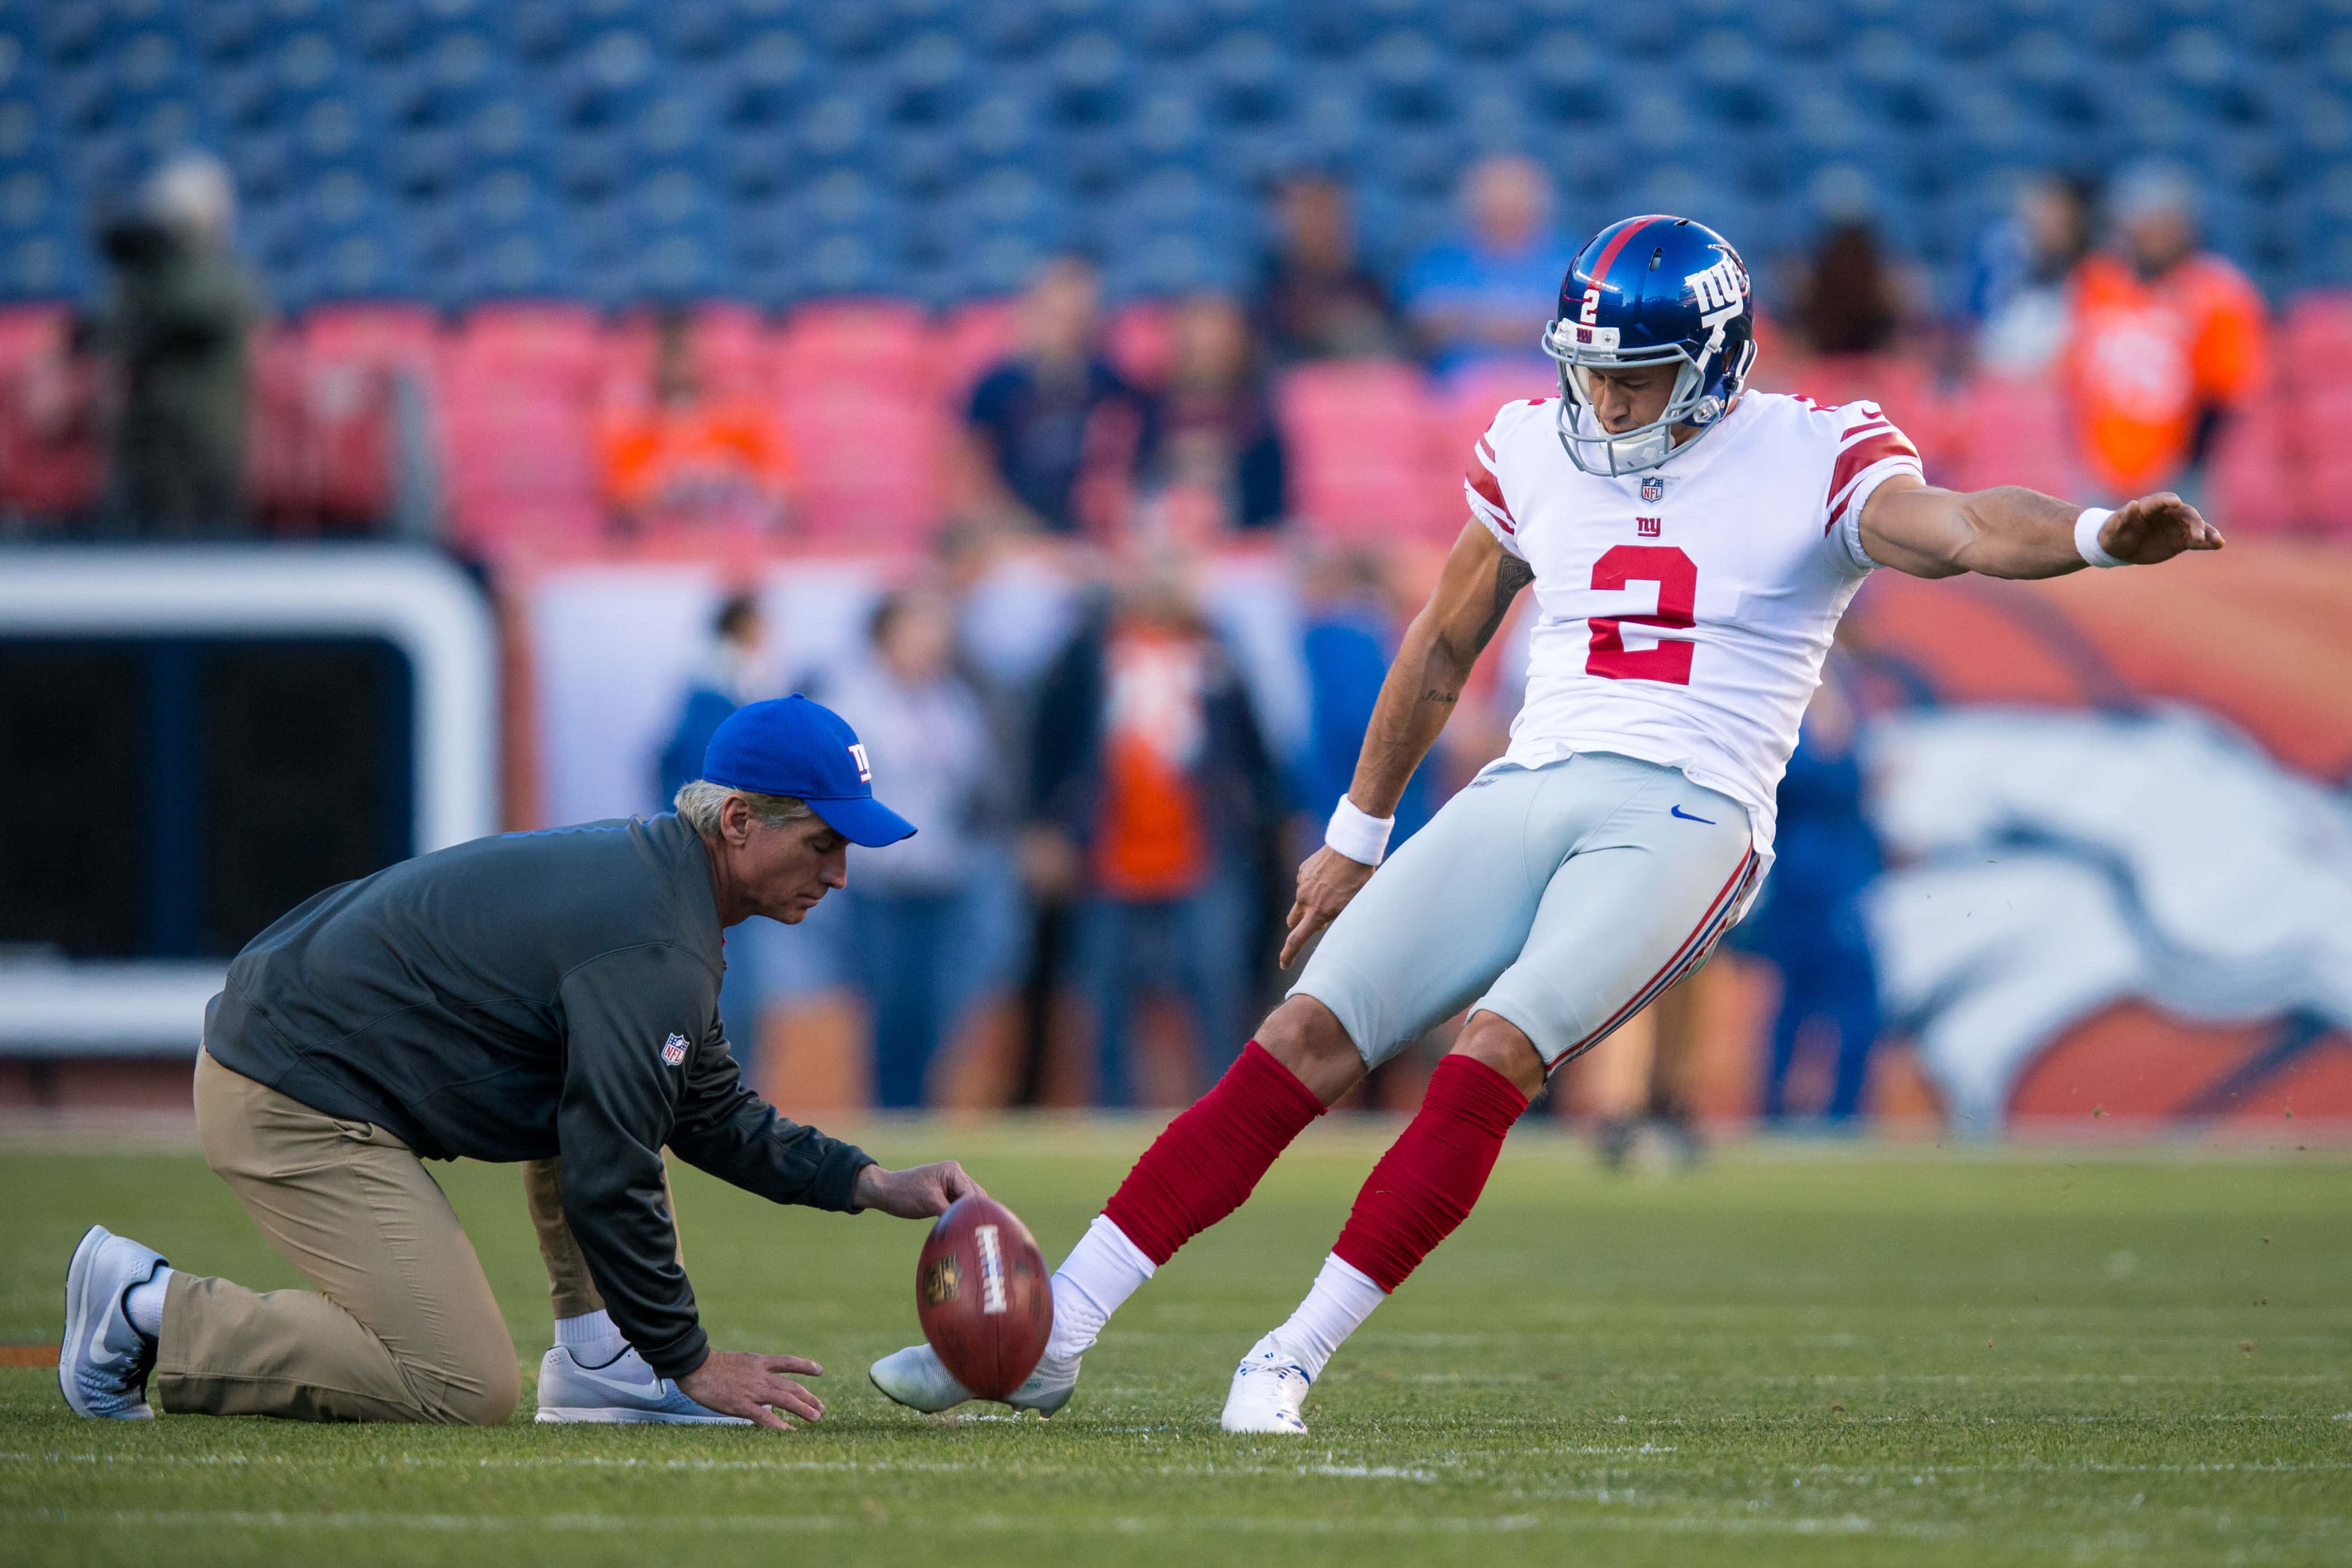 Oct 15, 2017; Denver, CO, USA; New York Giants kicker Aldrick Rosas (2) warms up before the game against the Denver Broncos at Sports Authority Field at Mile High. Mandatory Credit: Isaiah J. Downing-USA TODAY Sports